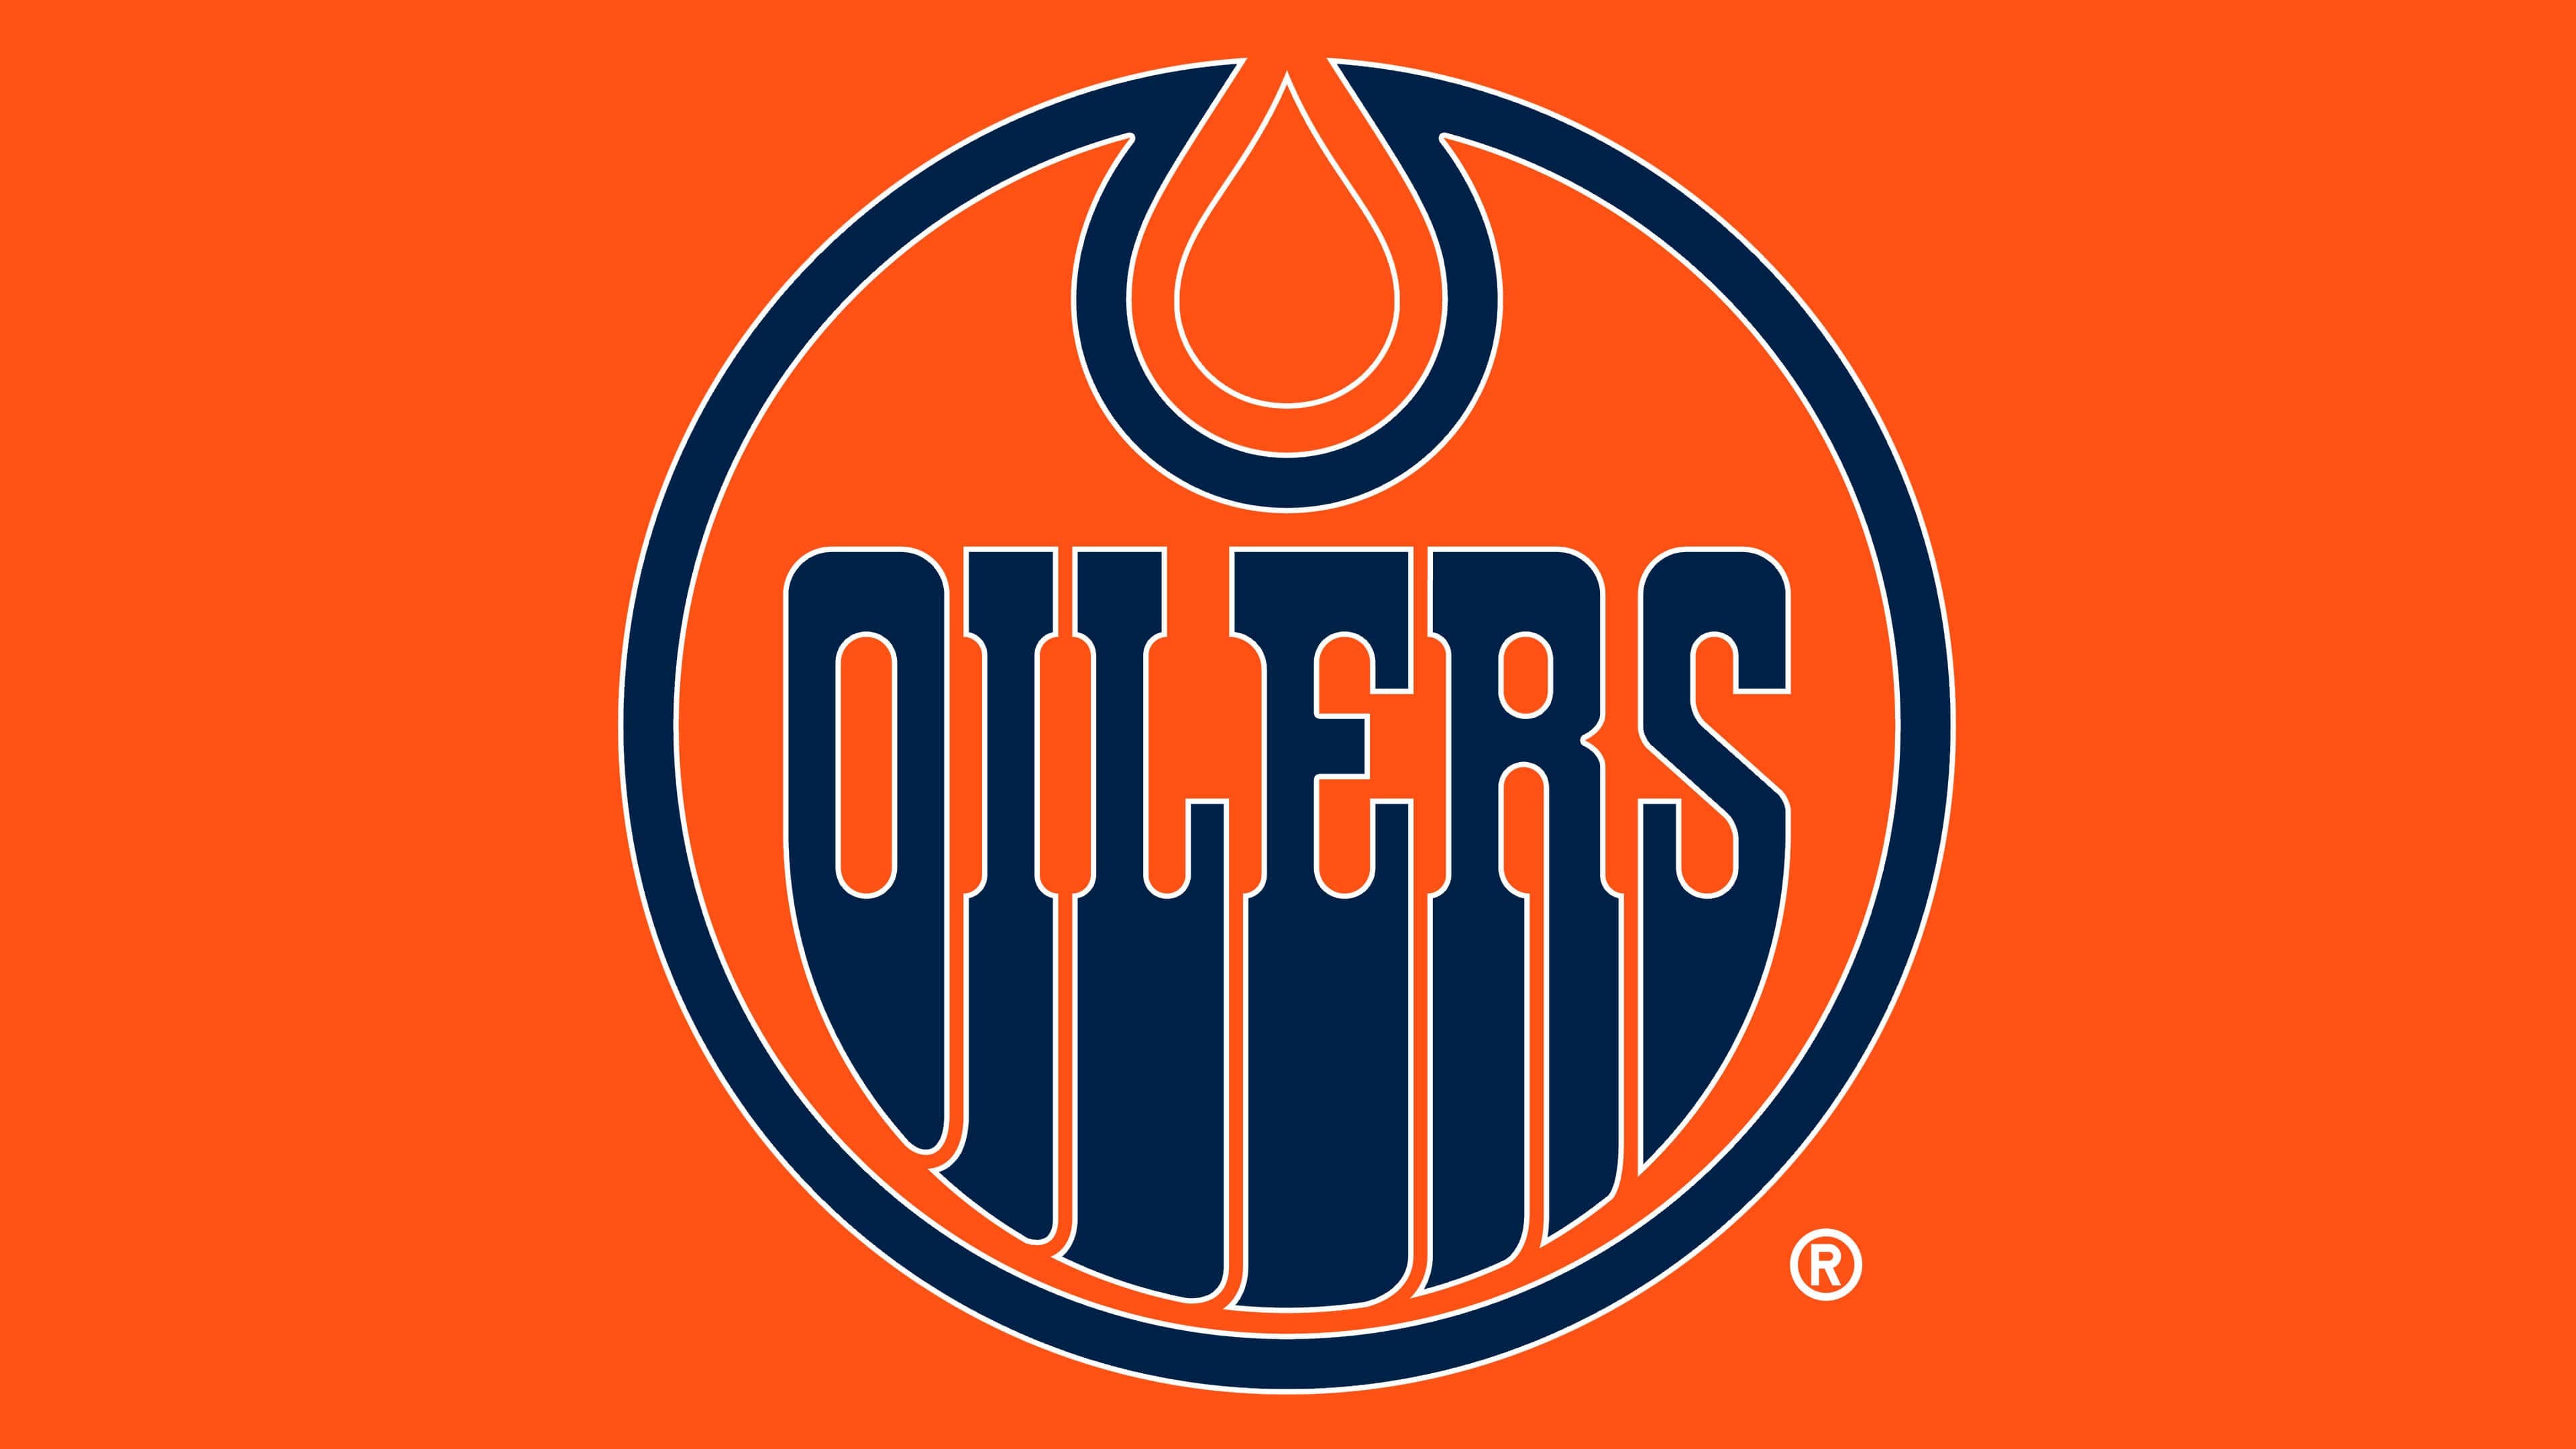 Edmonton Oilers Logo The Most Famous Brands And Company Logos In The World